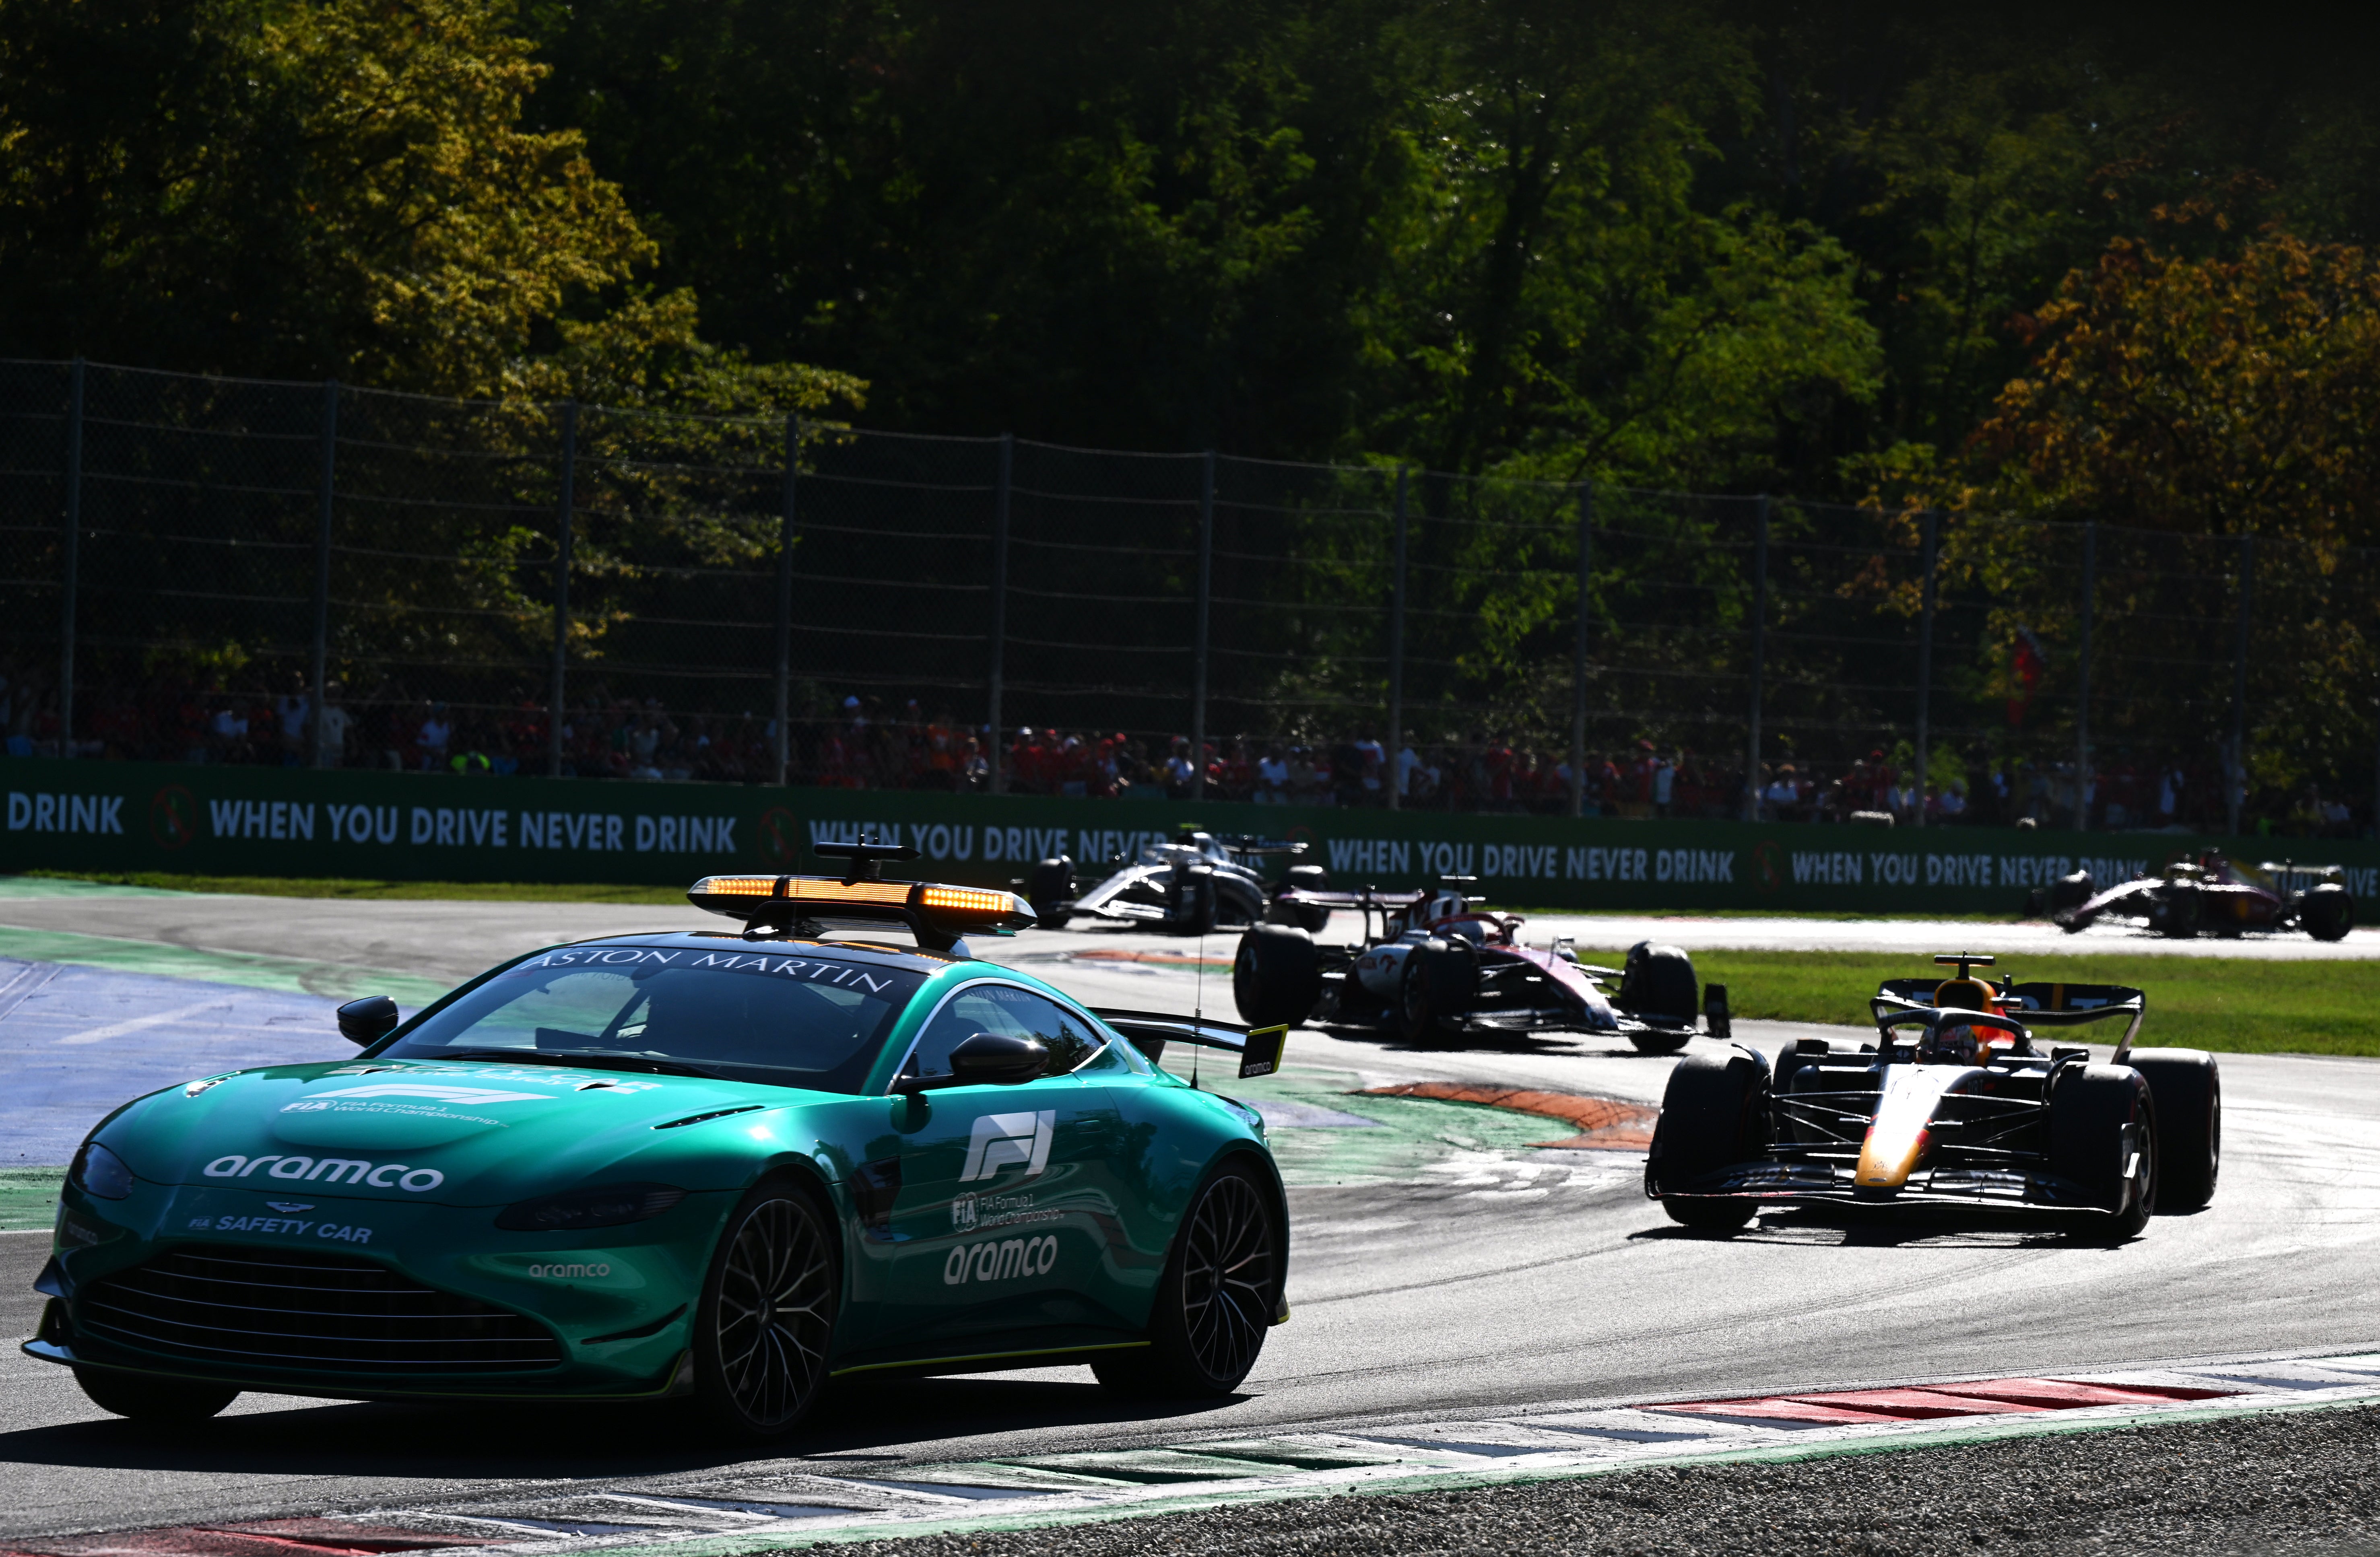 The Italian Grand Prix ended behind the safety car